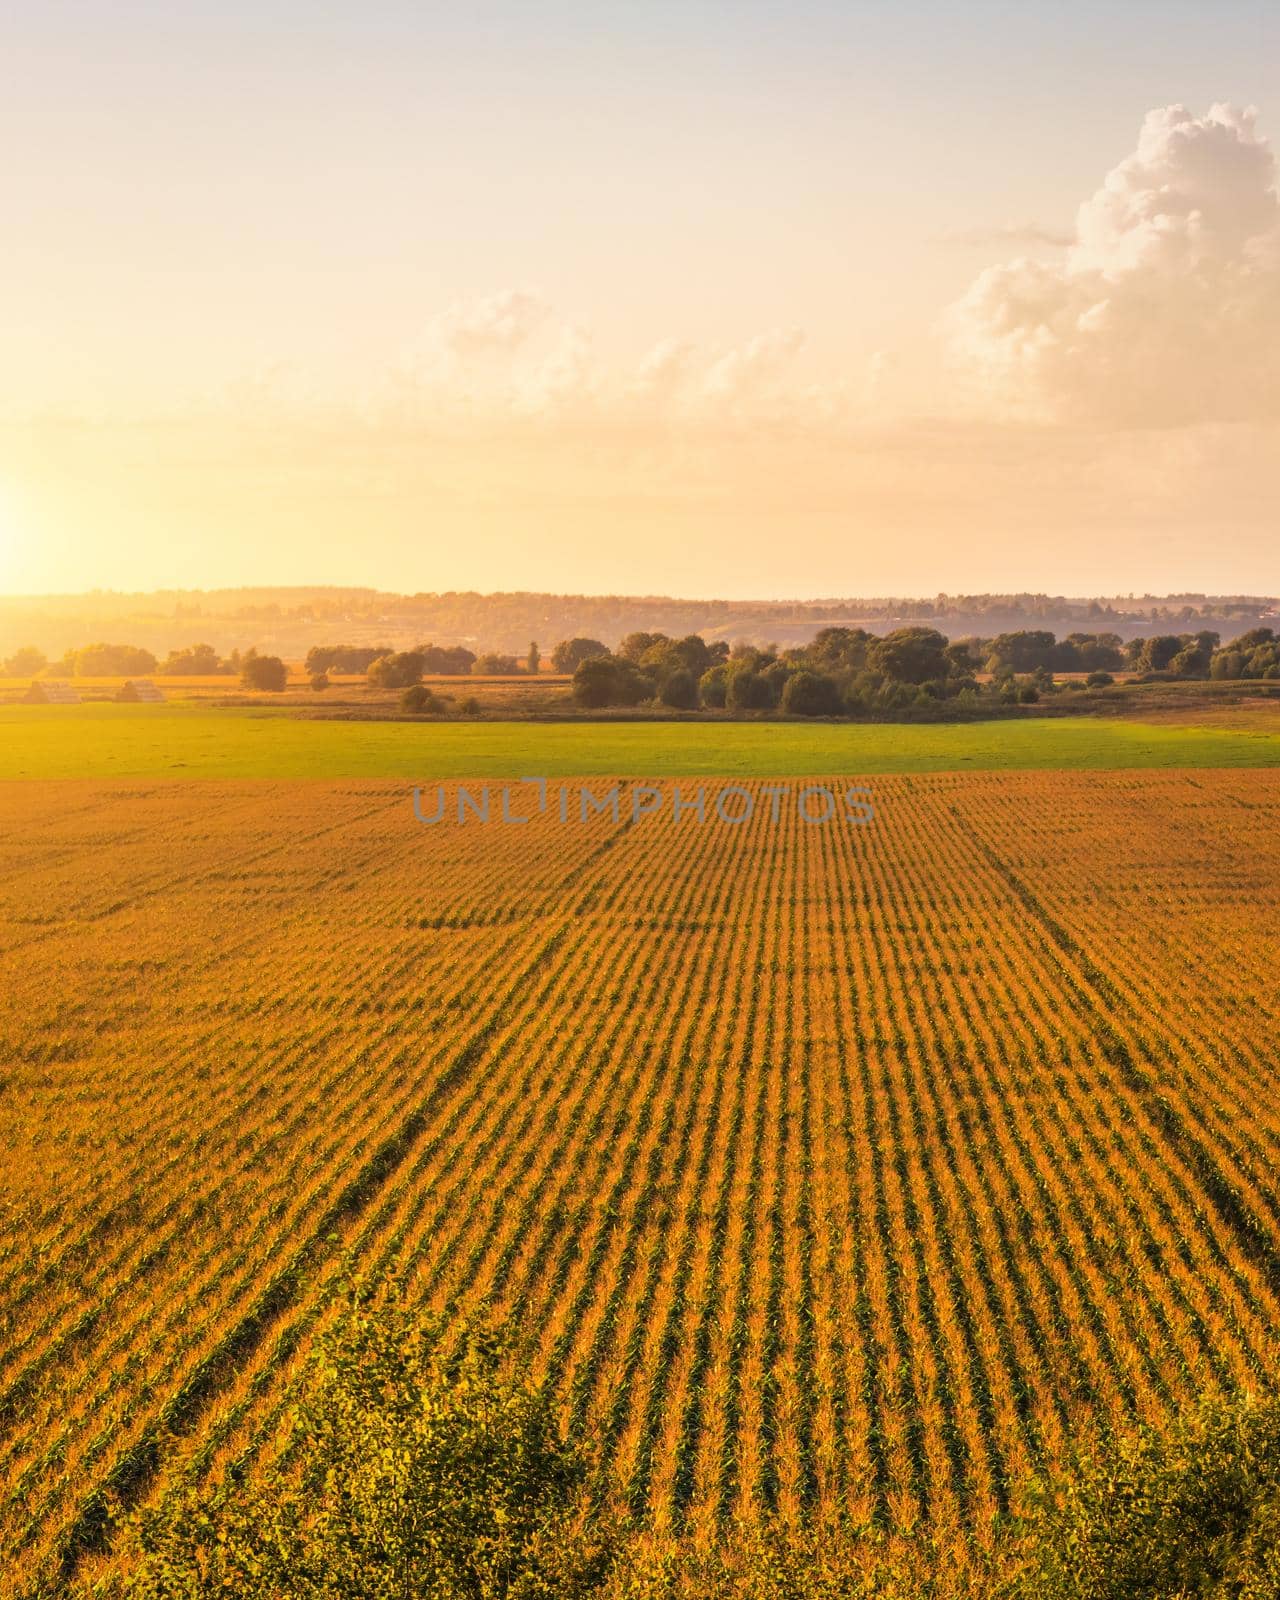 Top view to the rows of young corn in an agricultural field at sunset or sunrise. by Eugene_Yemelyanov